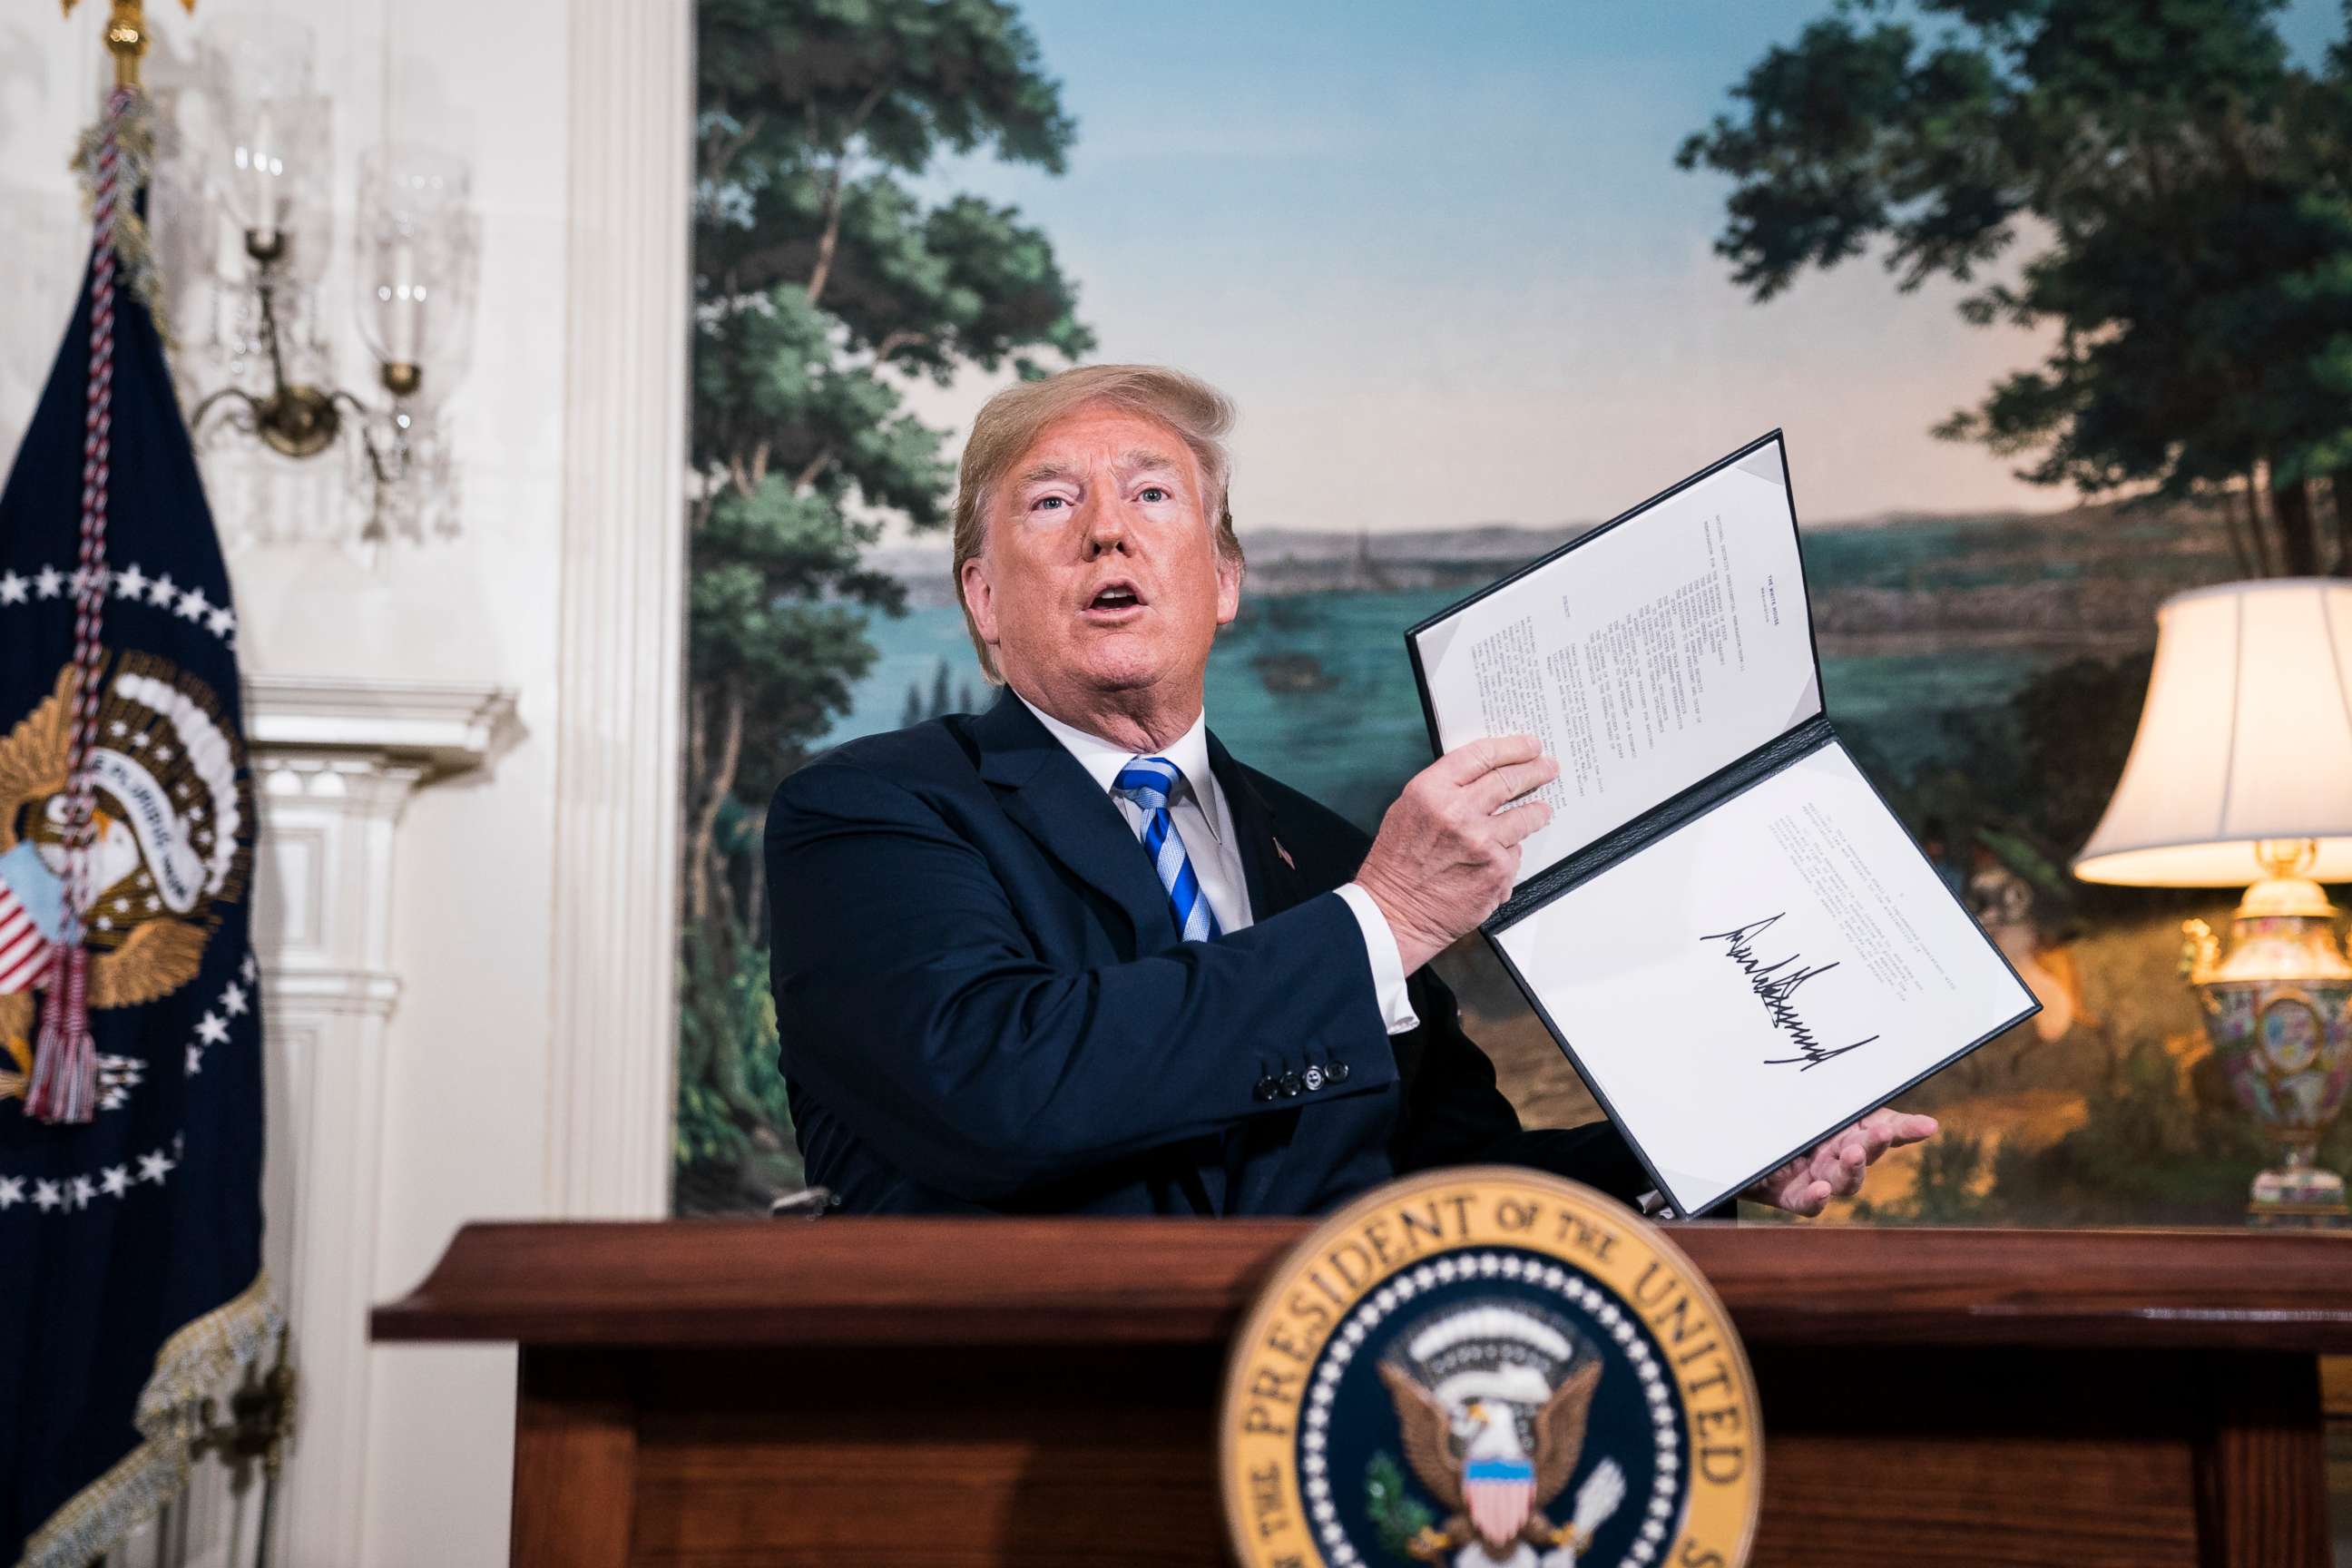 PHOTO: President Donald Trump signs a National Security Presidential Memorandum as he announces the withdrawal of the United States from the Iran nuclear deal in the Diplomatic Reception Room of the White House, May 08, 2018.